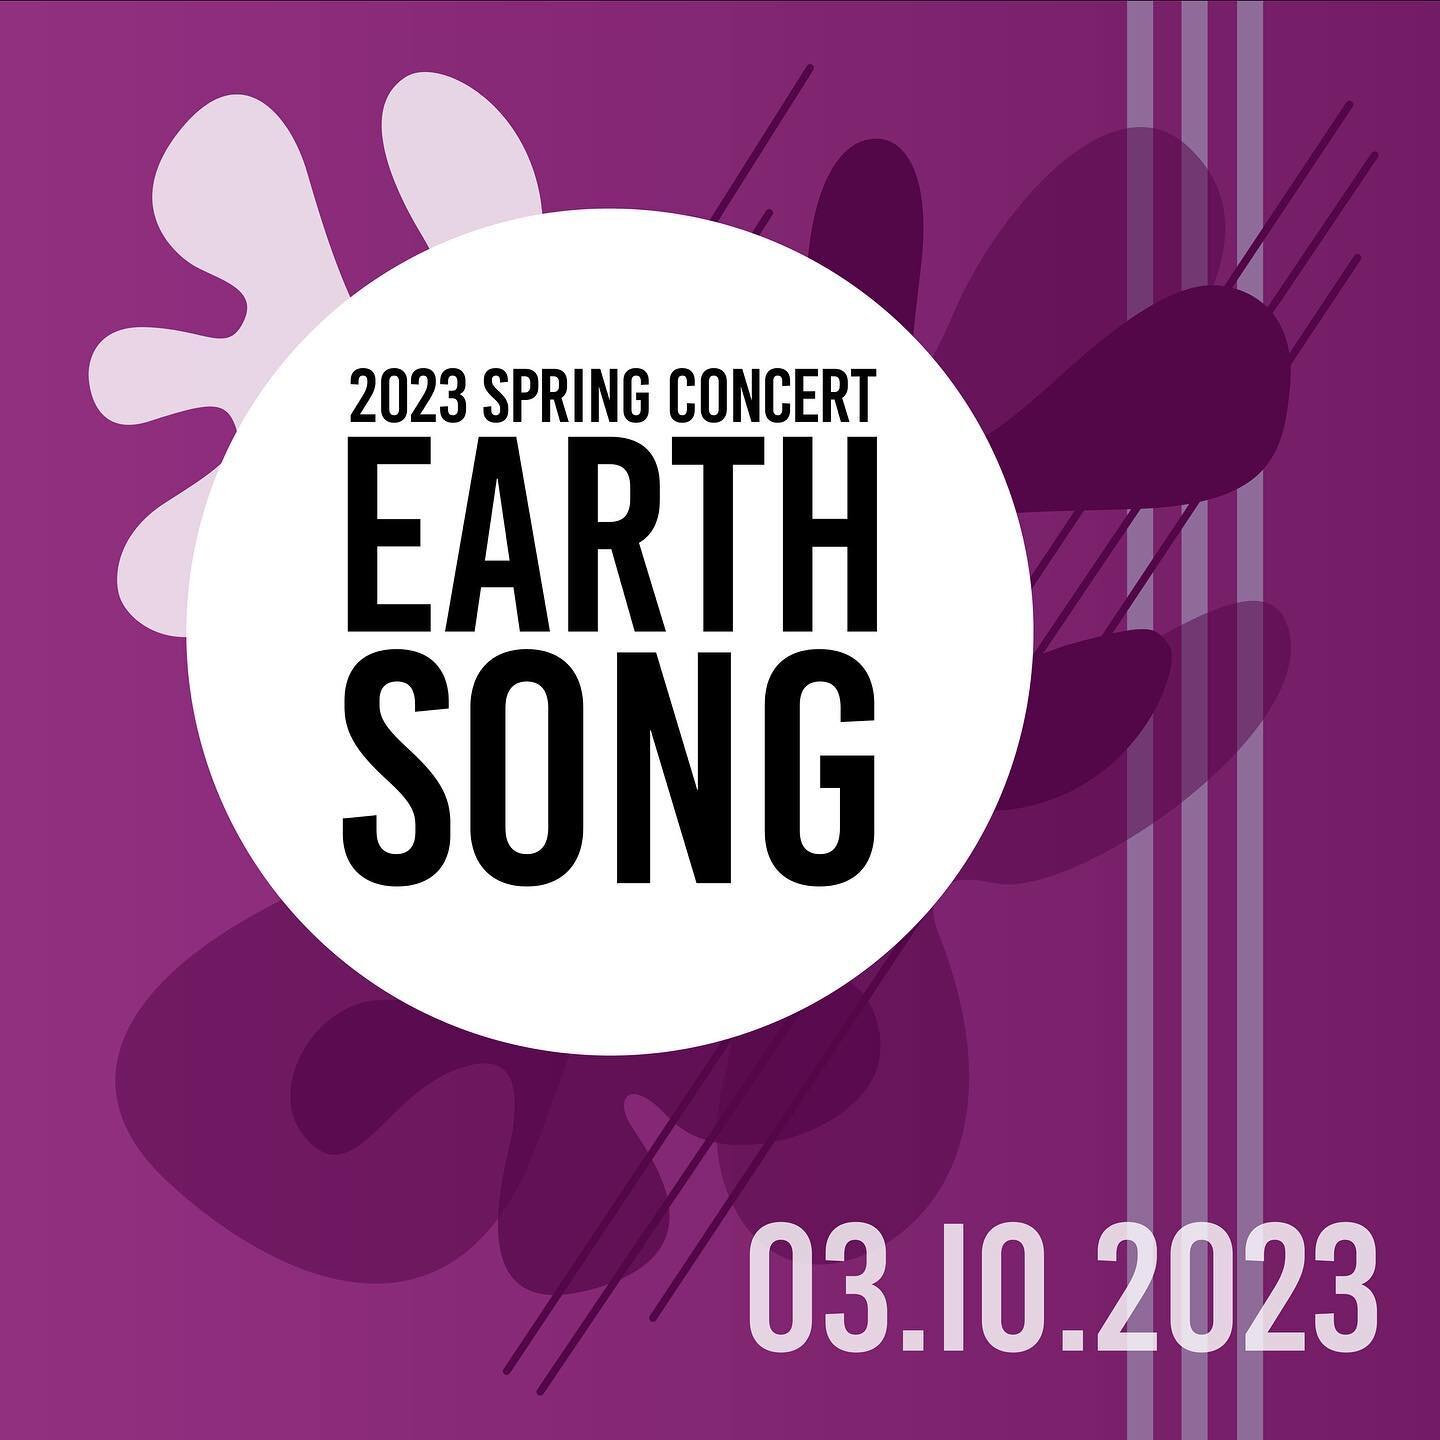 The West Covina High School Choral Department proudly presents

2023 Spring Concert: Earth Songs
March 10, 2023; 7pm (PST)
West Covina High School - 
GYM

Join us for this incredible concert featuring performances from all ensembles from The West Cov